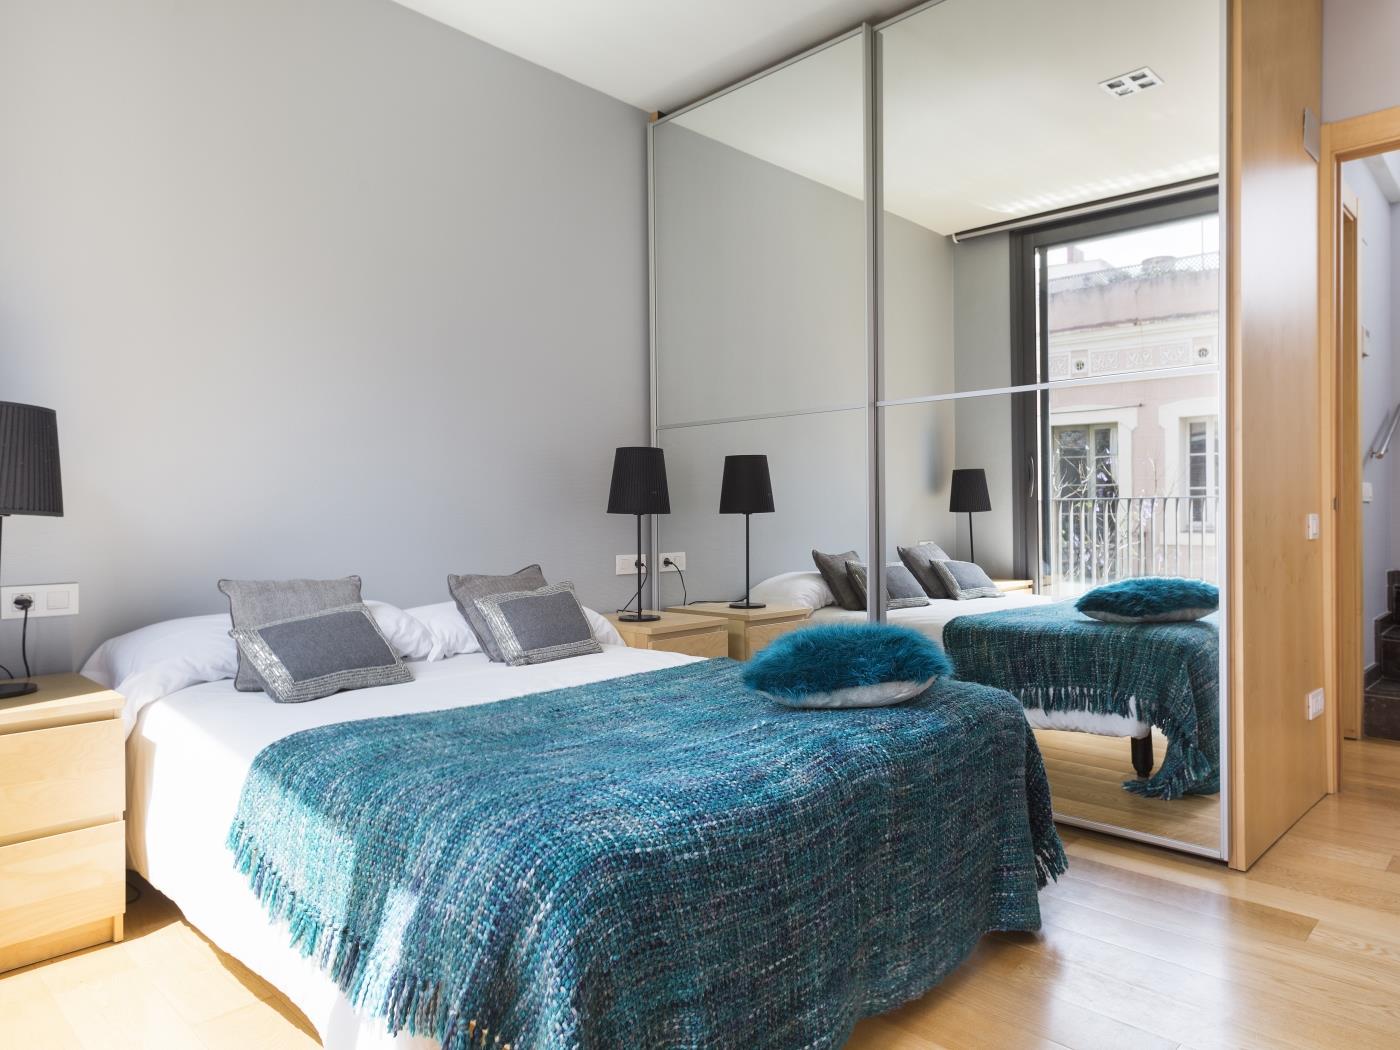 4 apartments with terrace & shared pool in the heart of Gràcia for up to 24 pax - My Space Barcelona Apartments